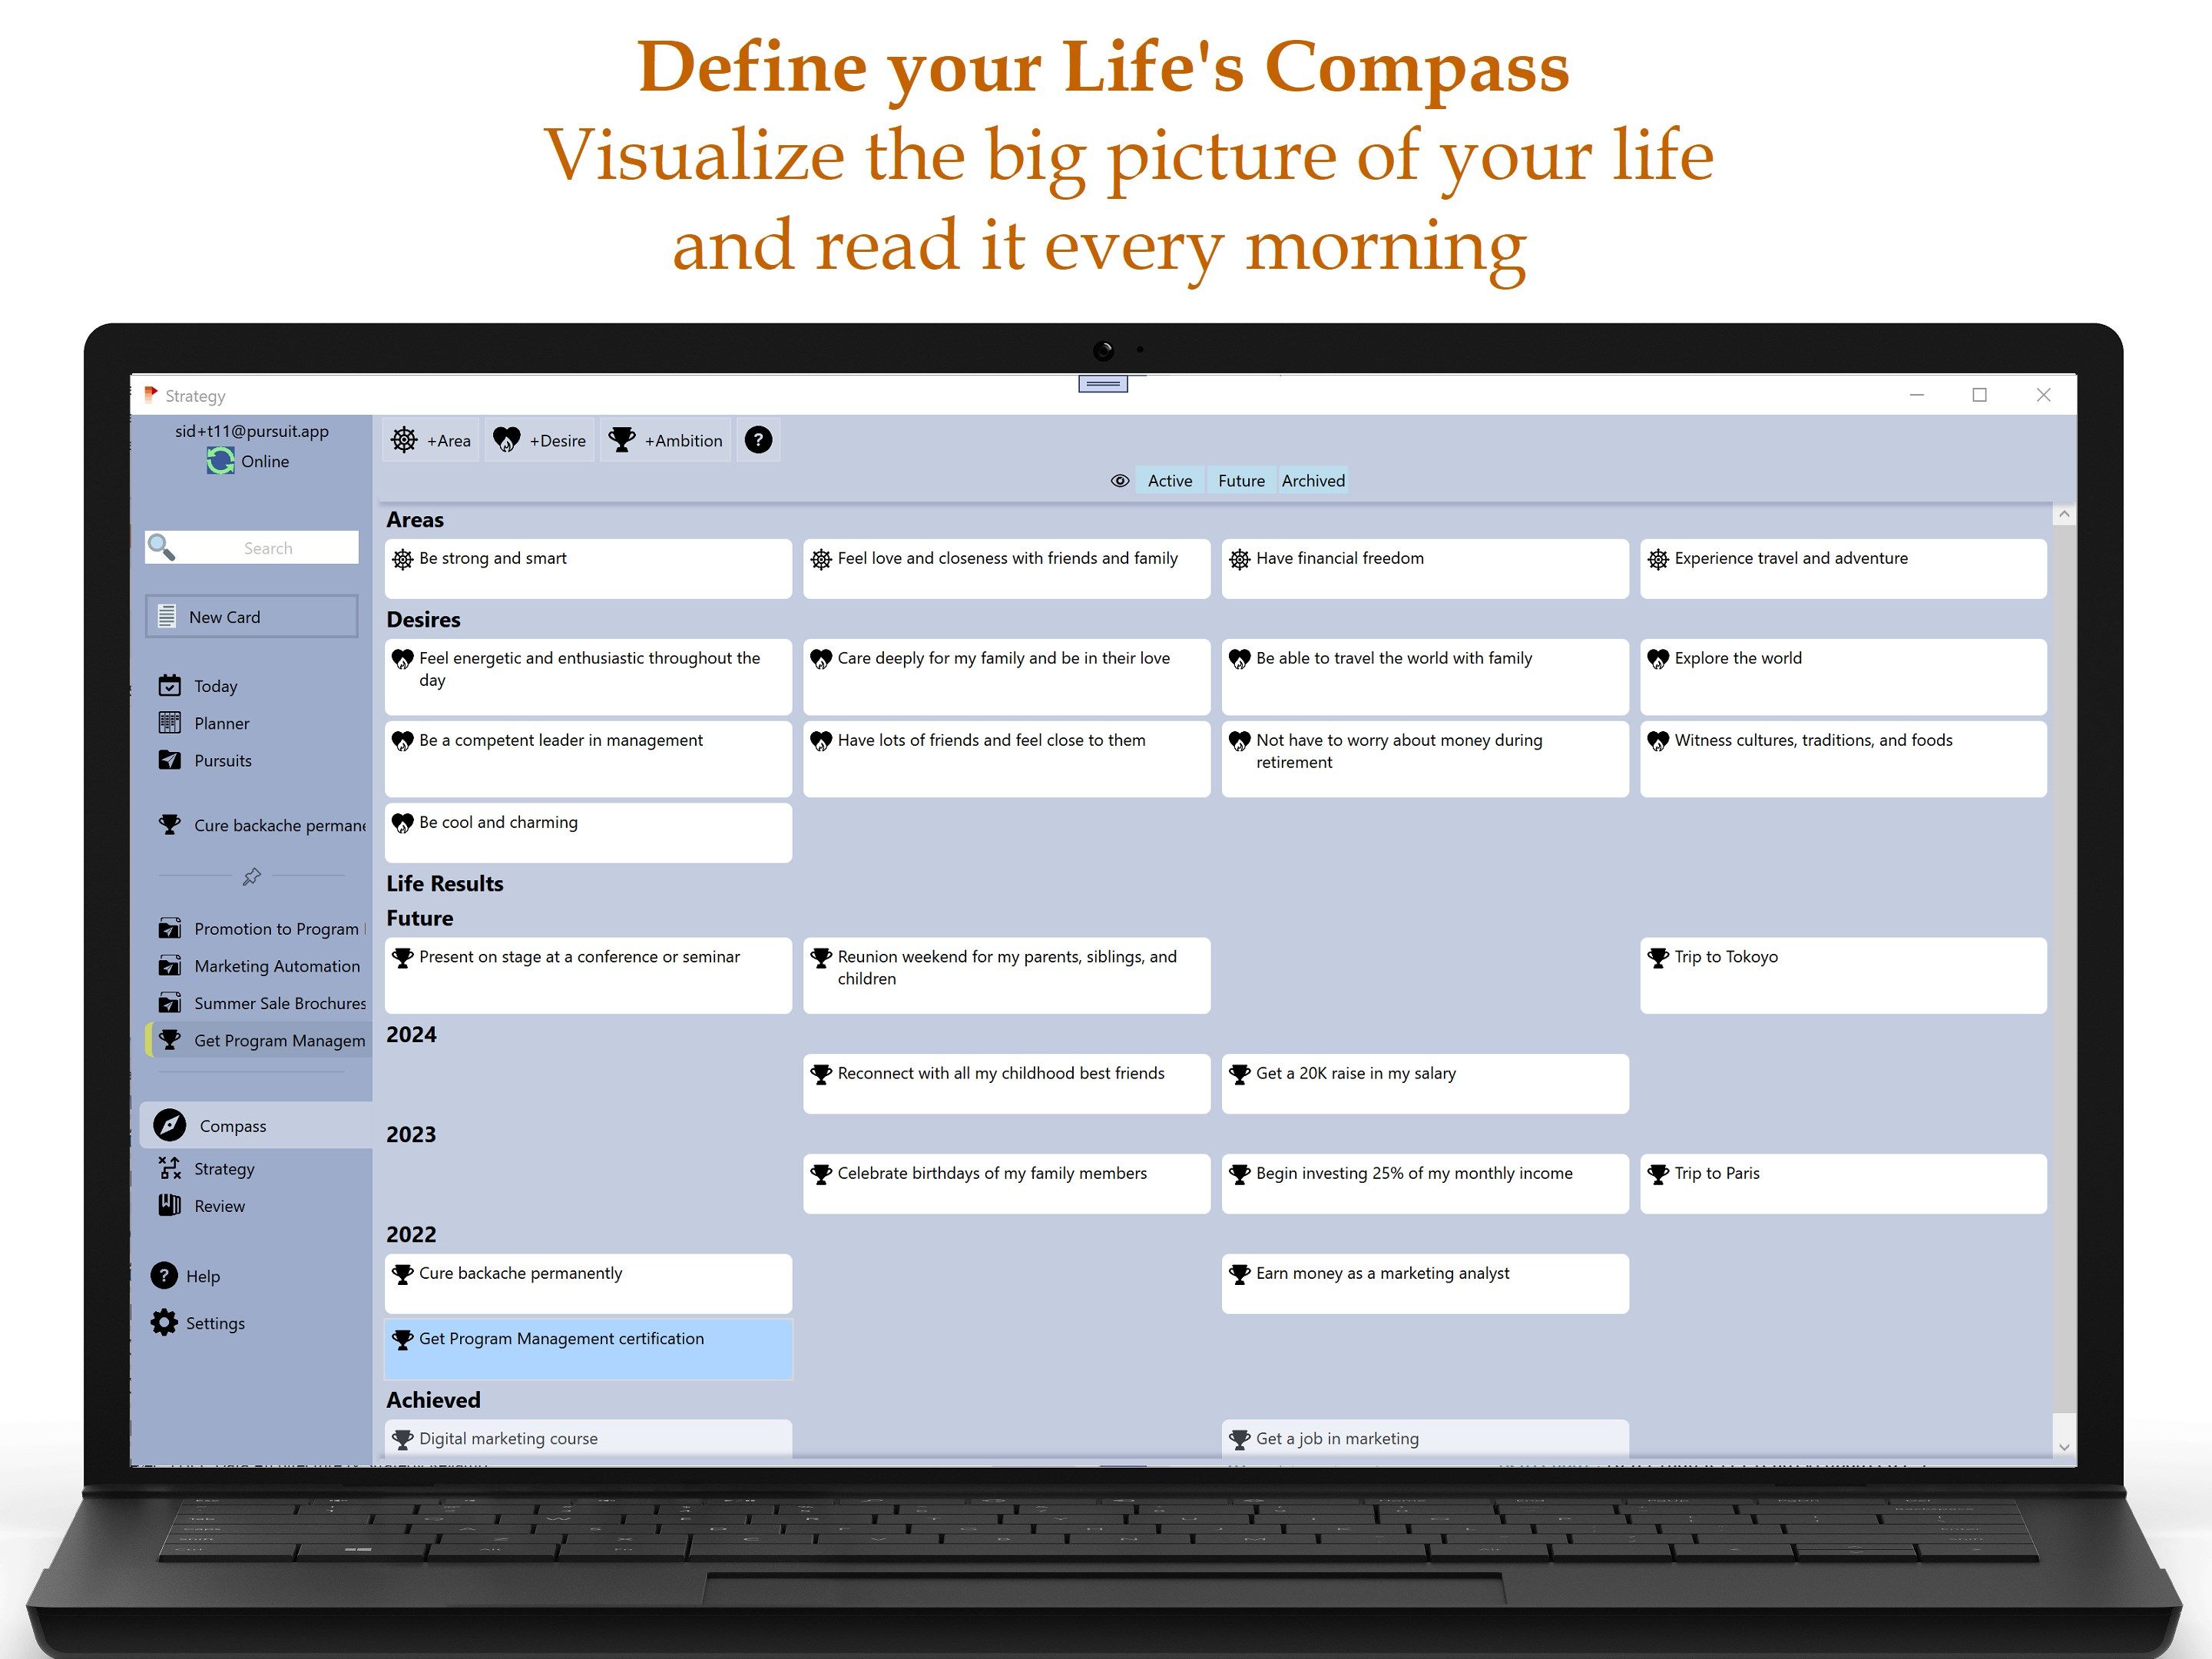 Define your Life's Compass: Visualize the big picture of your life and read it every morning